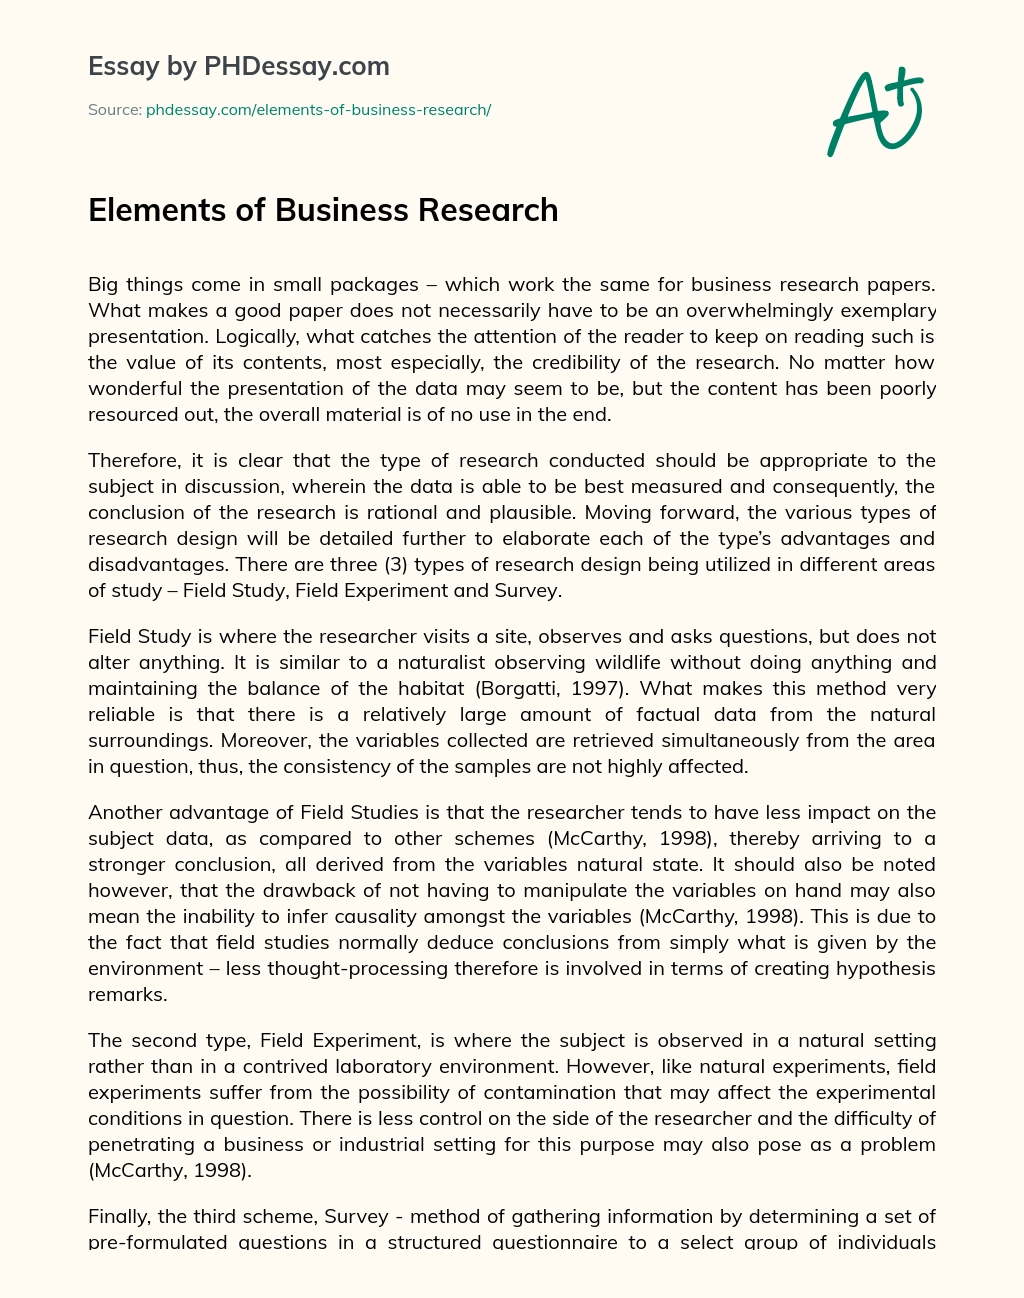 Elements of Business Research essay